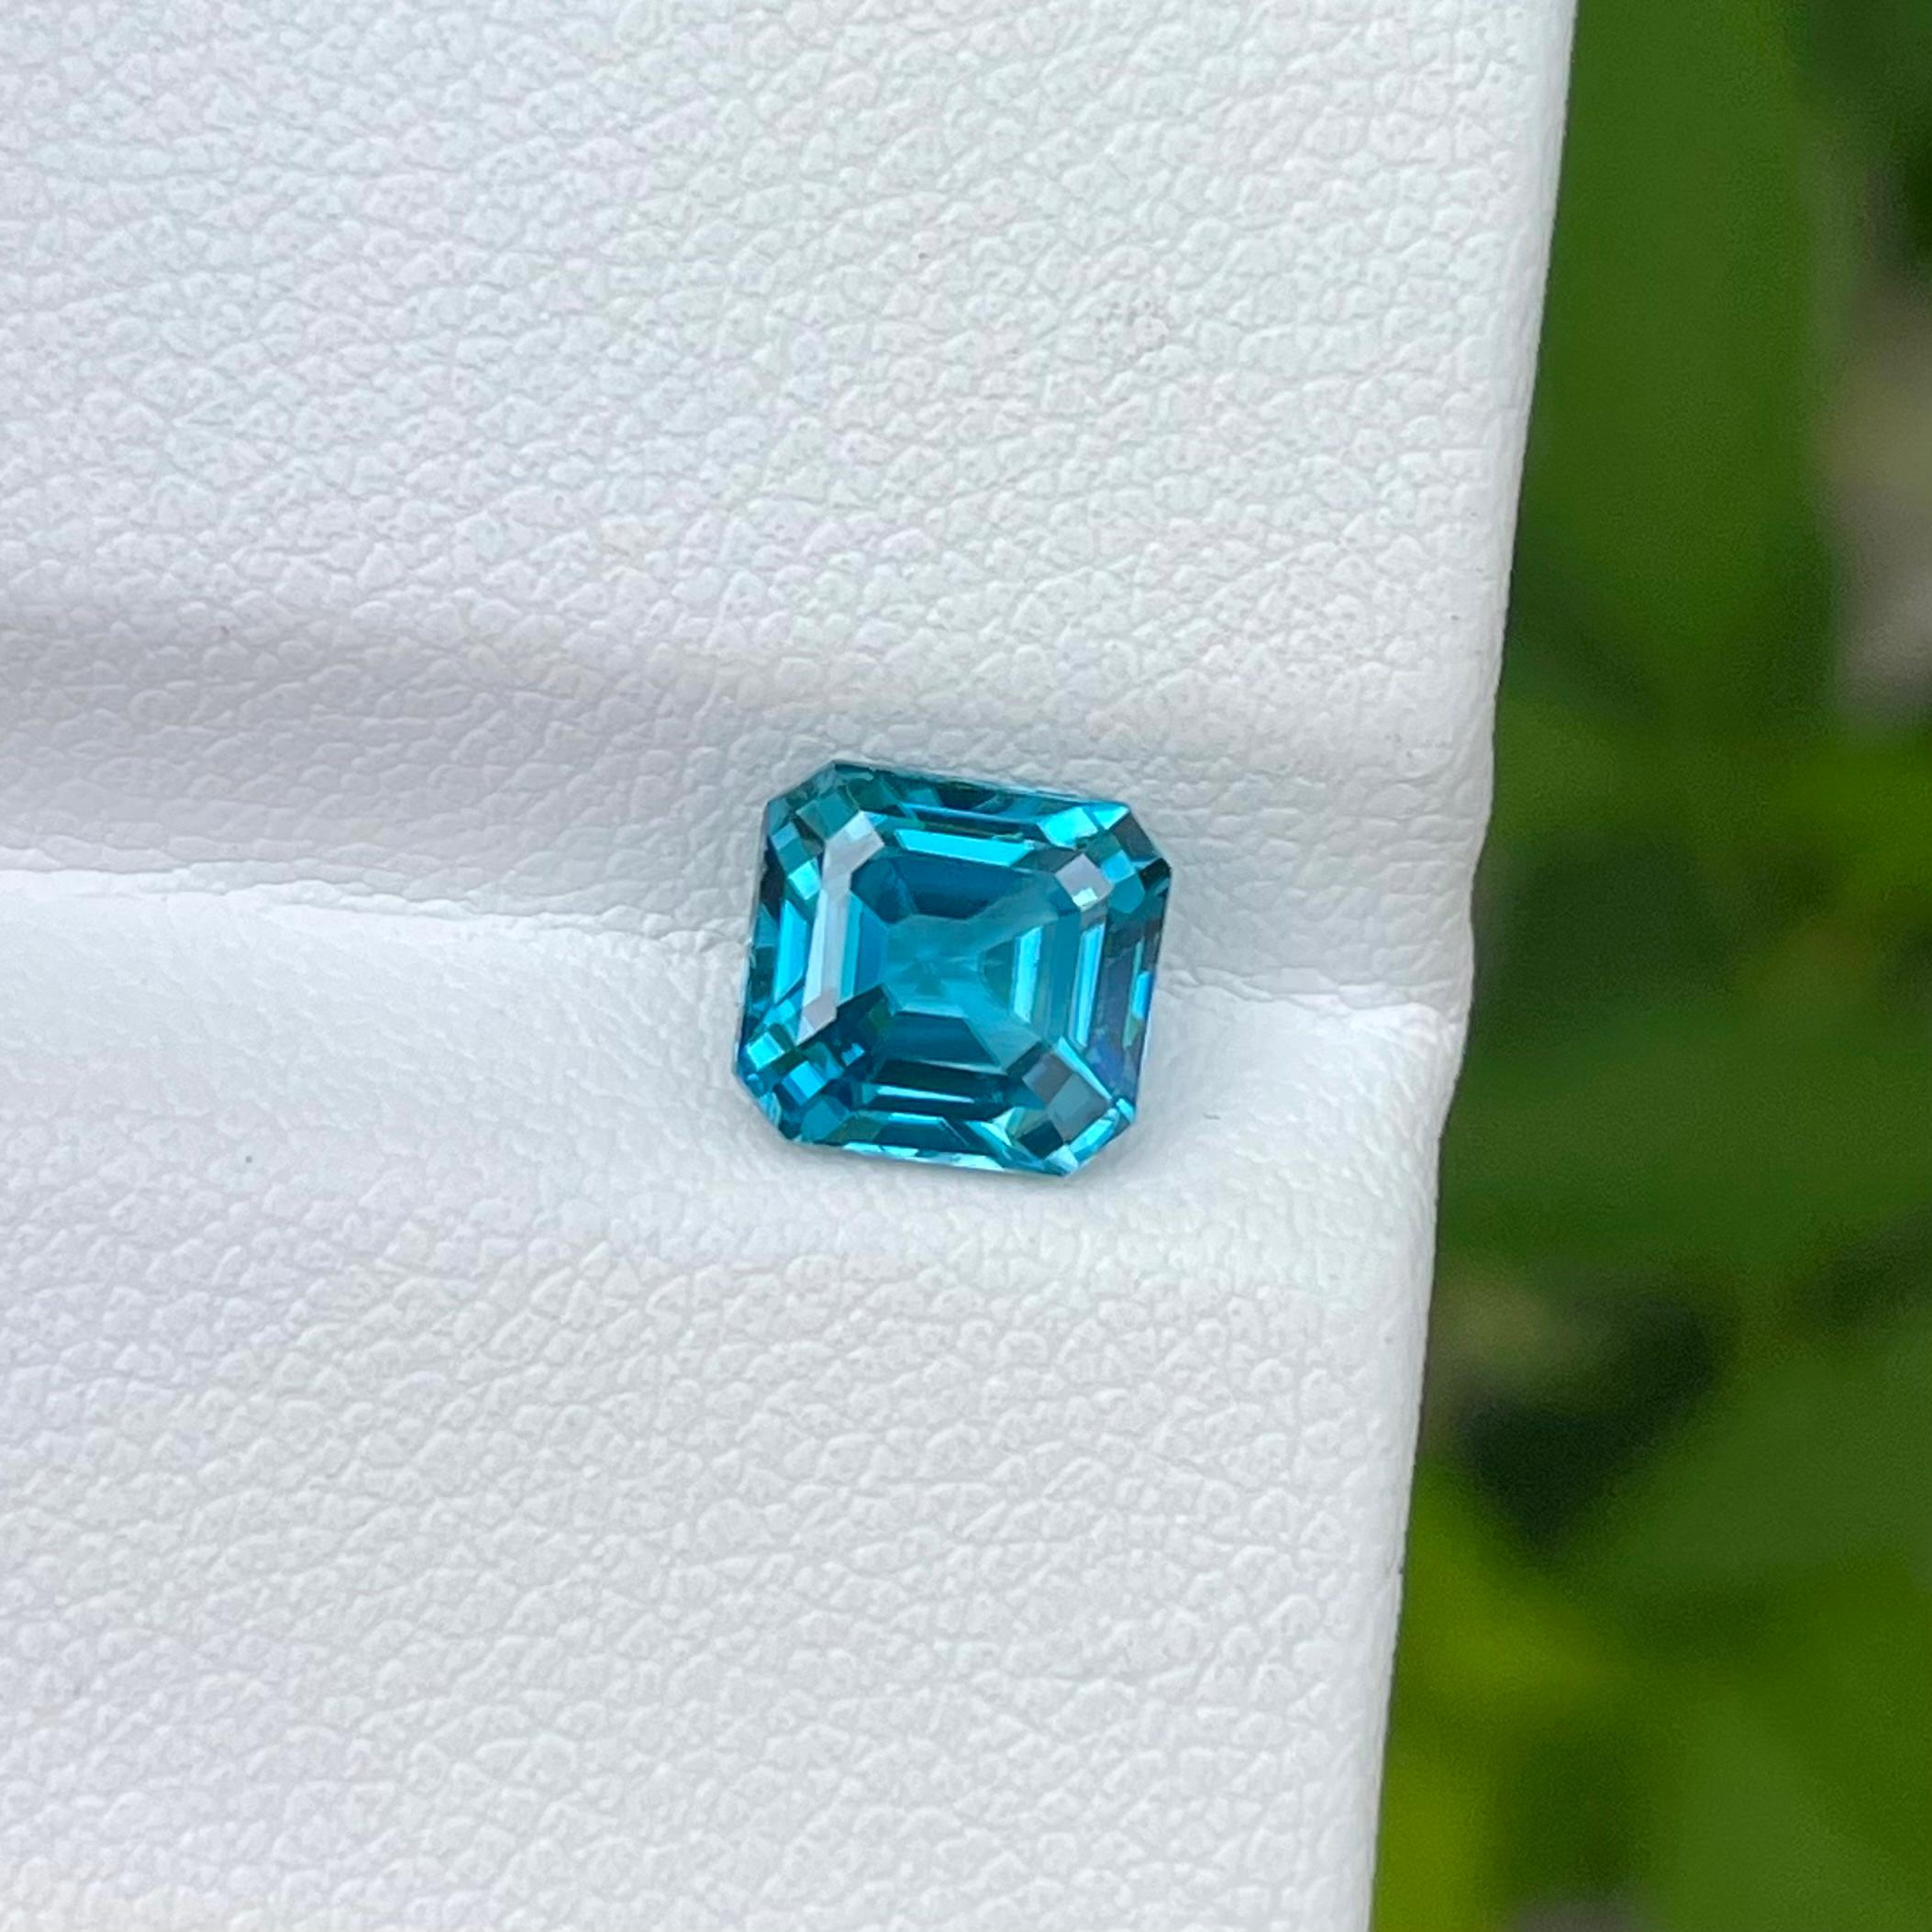 Weight 2.40 carats 
Dimensions 7.1 x 6.7 x 4.3 mm
Treatment None 
Origin Cambodia 
Clarity VVS (Very, Very Slightly Included)
Shape Octagon 
Cut Emerald 




Elevate your jewelry collection with the exquisite beauty of a 2.40 carat Natural Cambodian